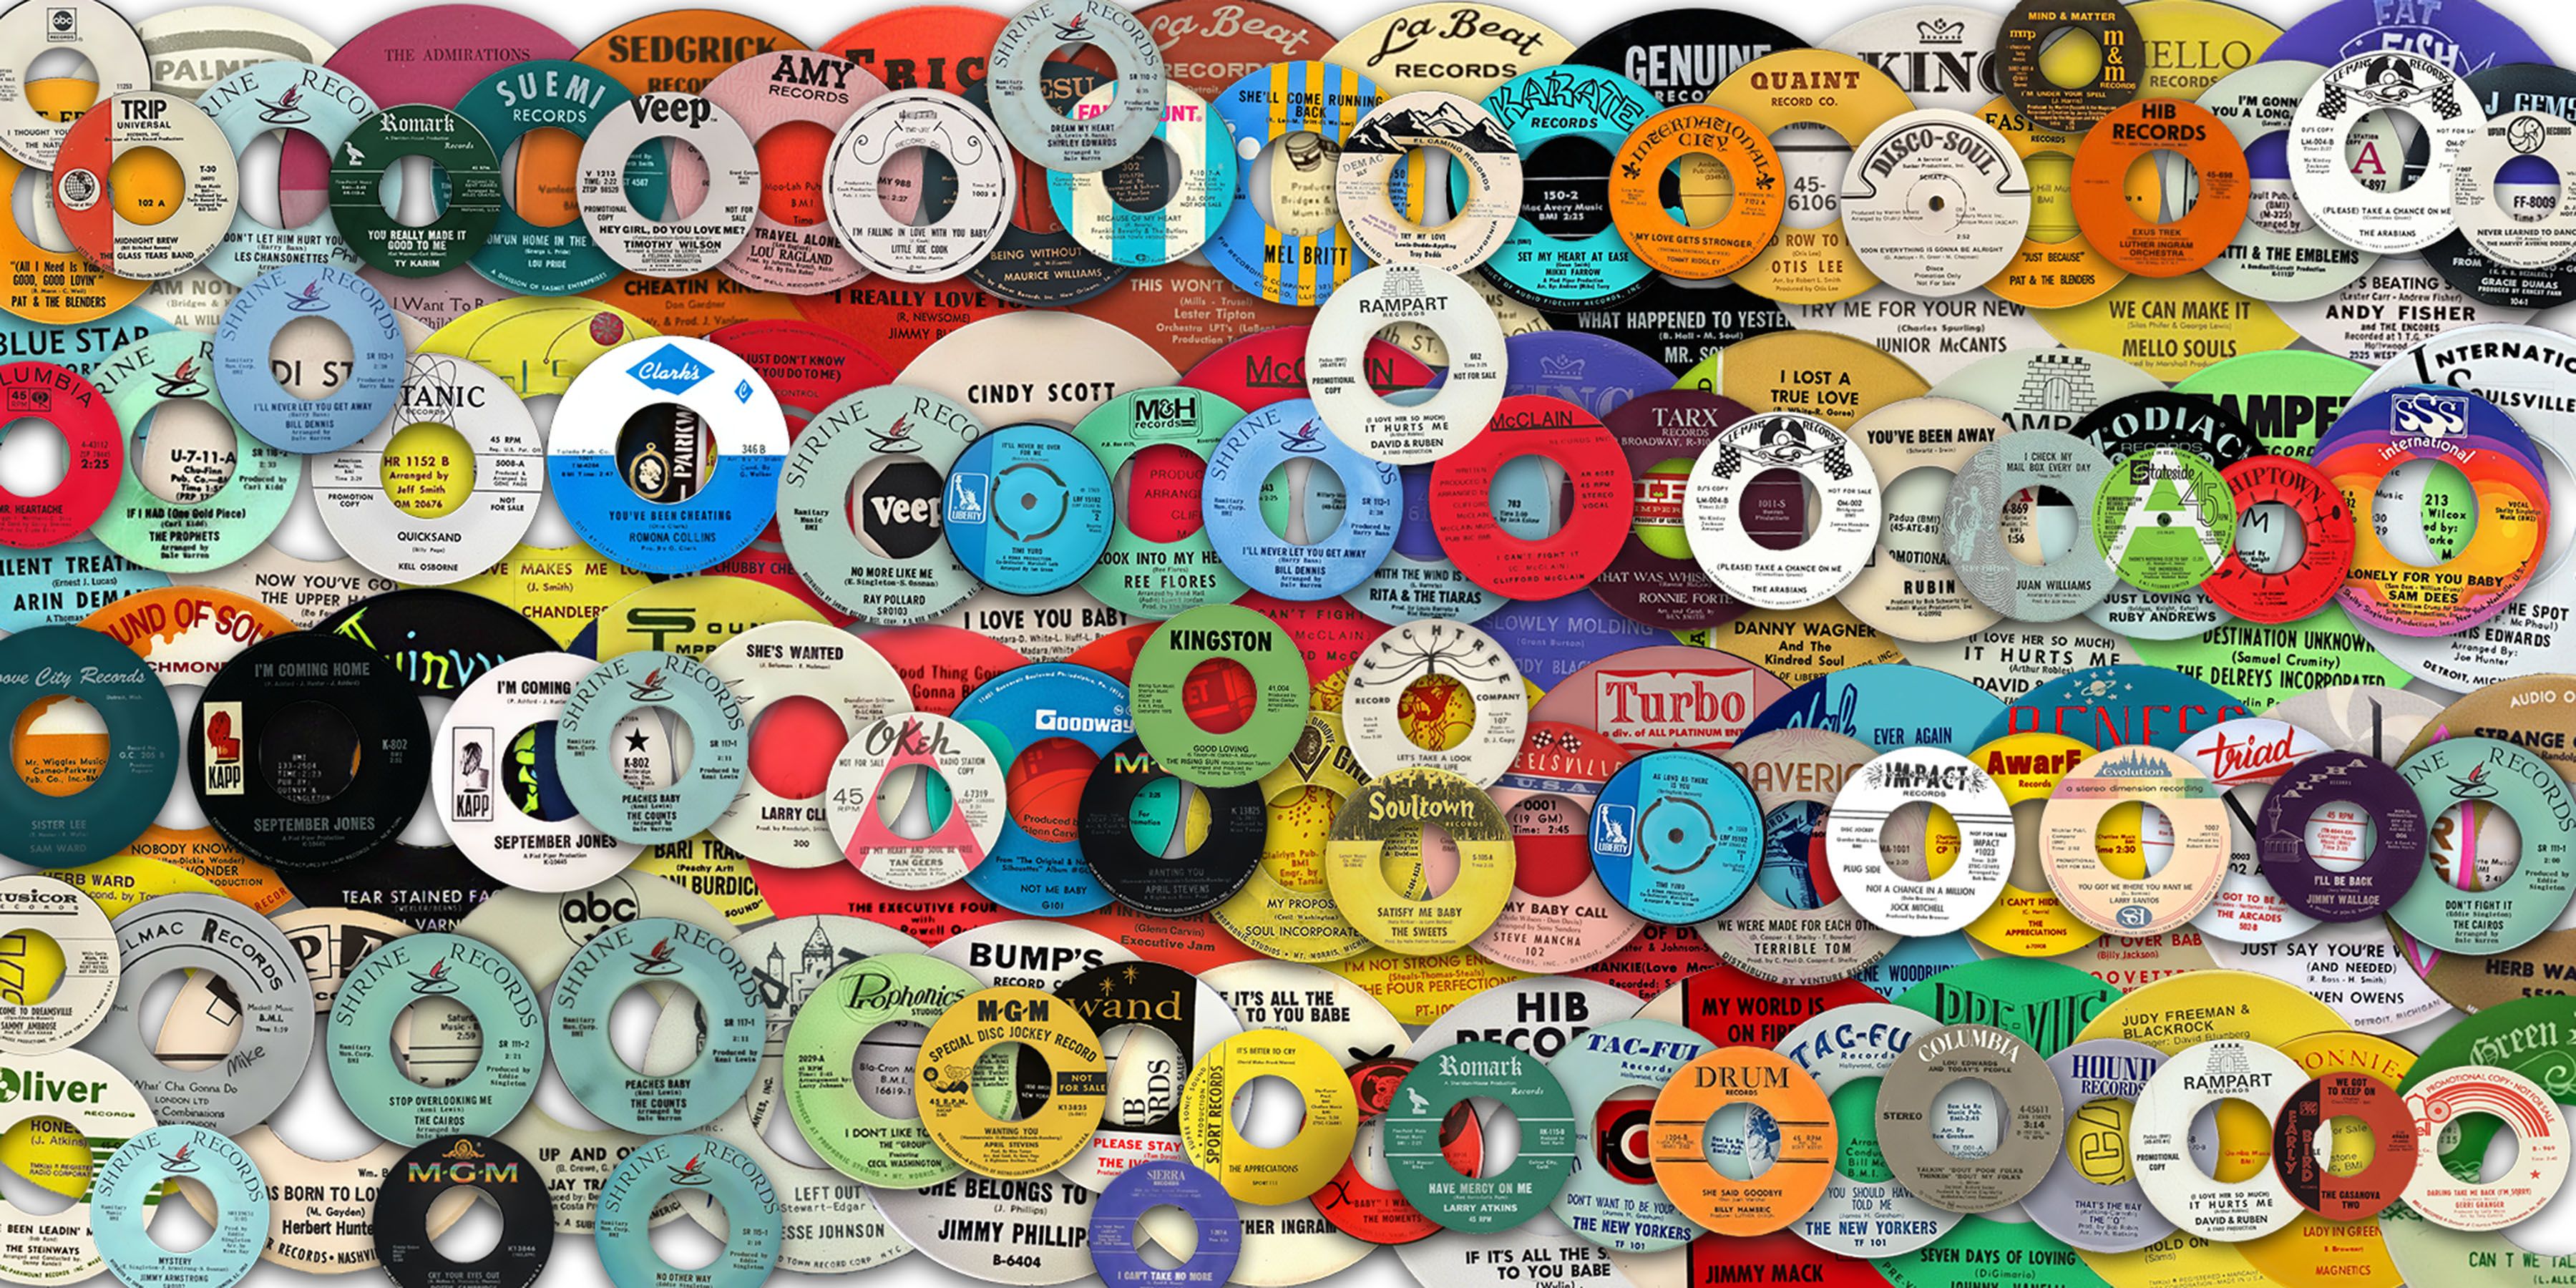 Wallpaper made from various Northern labels. Northern soul, Wallpaper, Music image